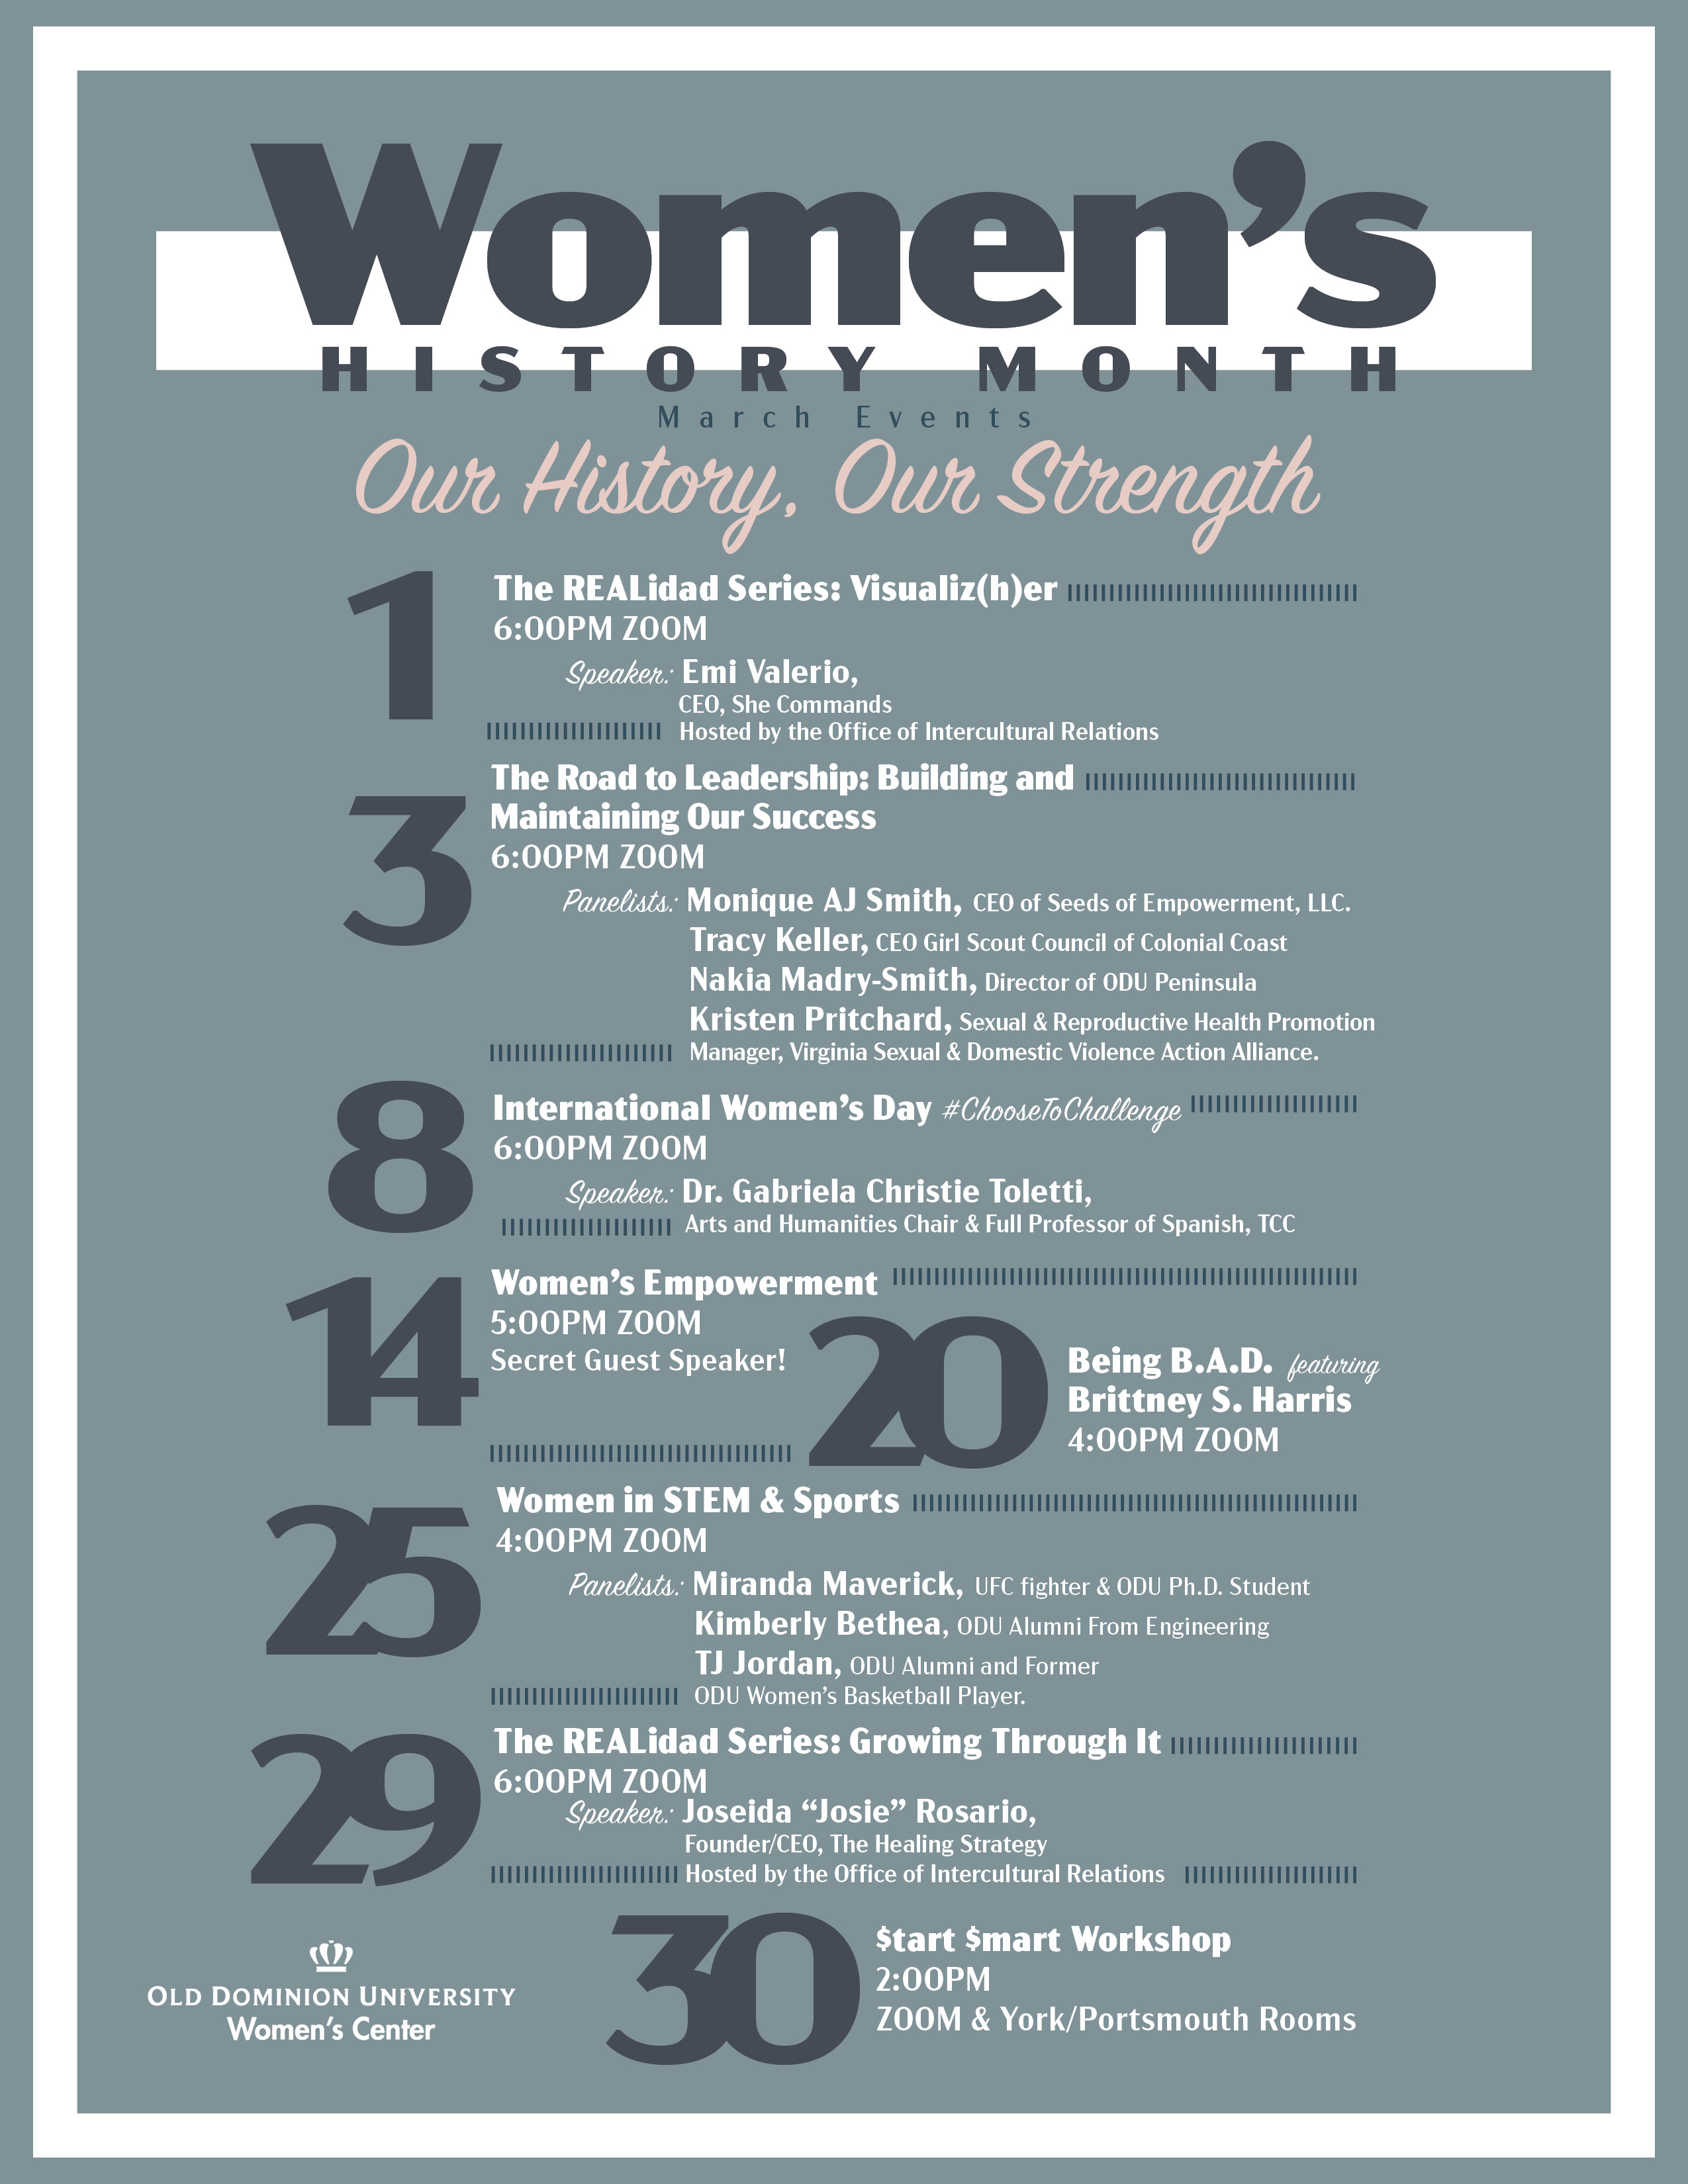 Women’s History Month Events Planned at ODU Old Dominion University